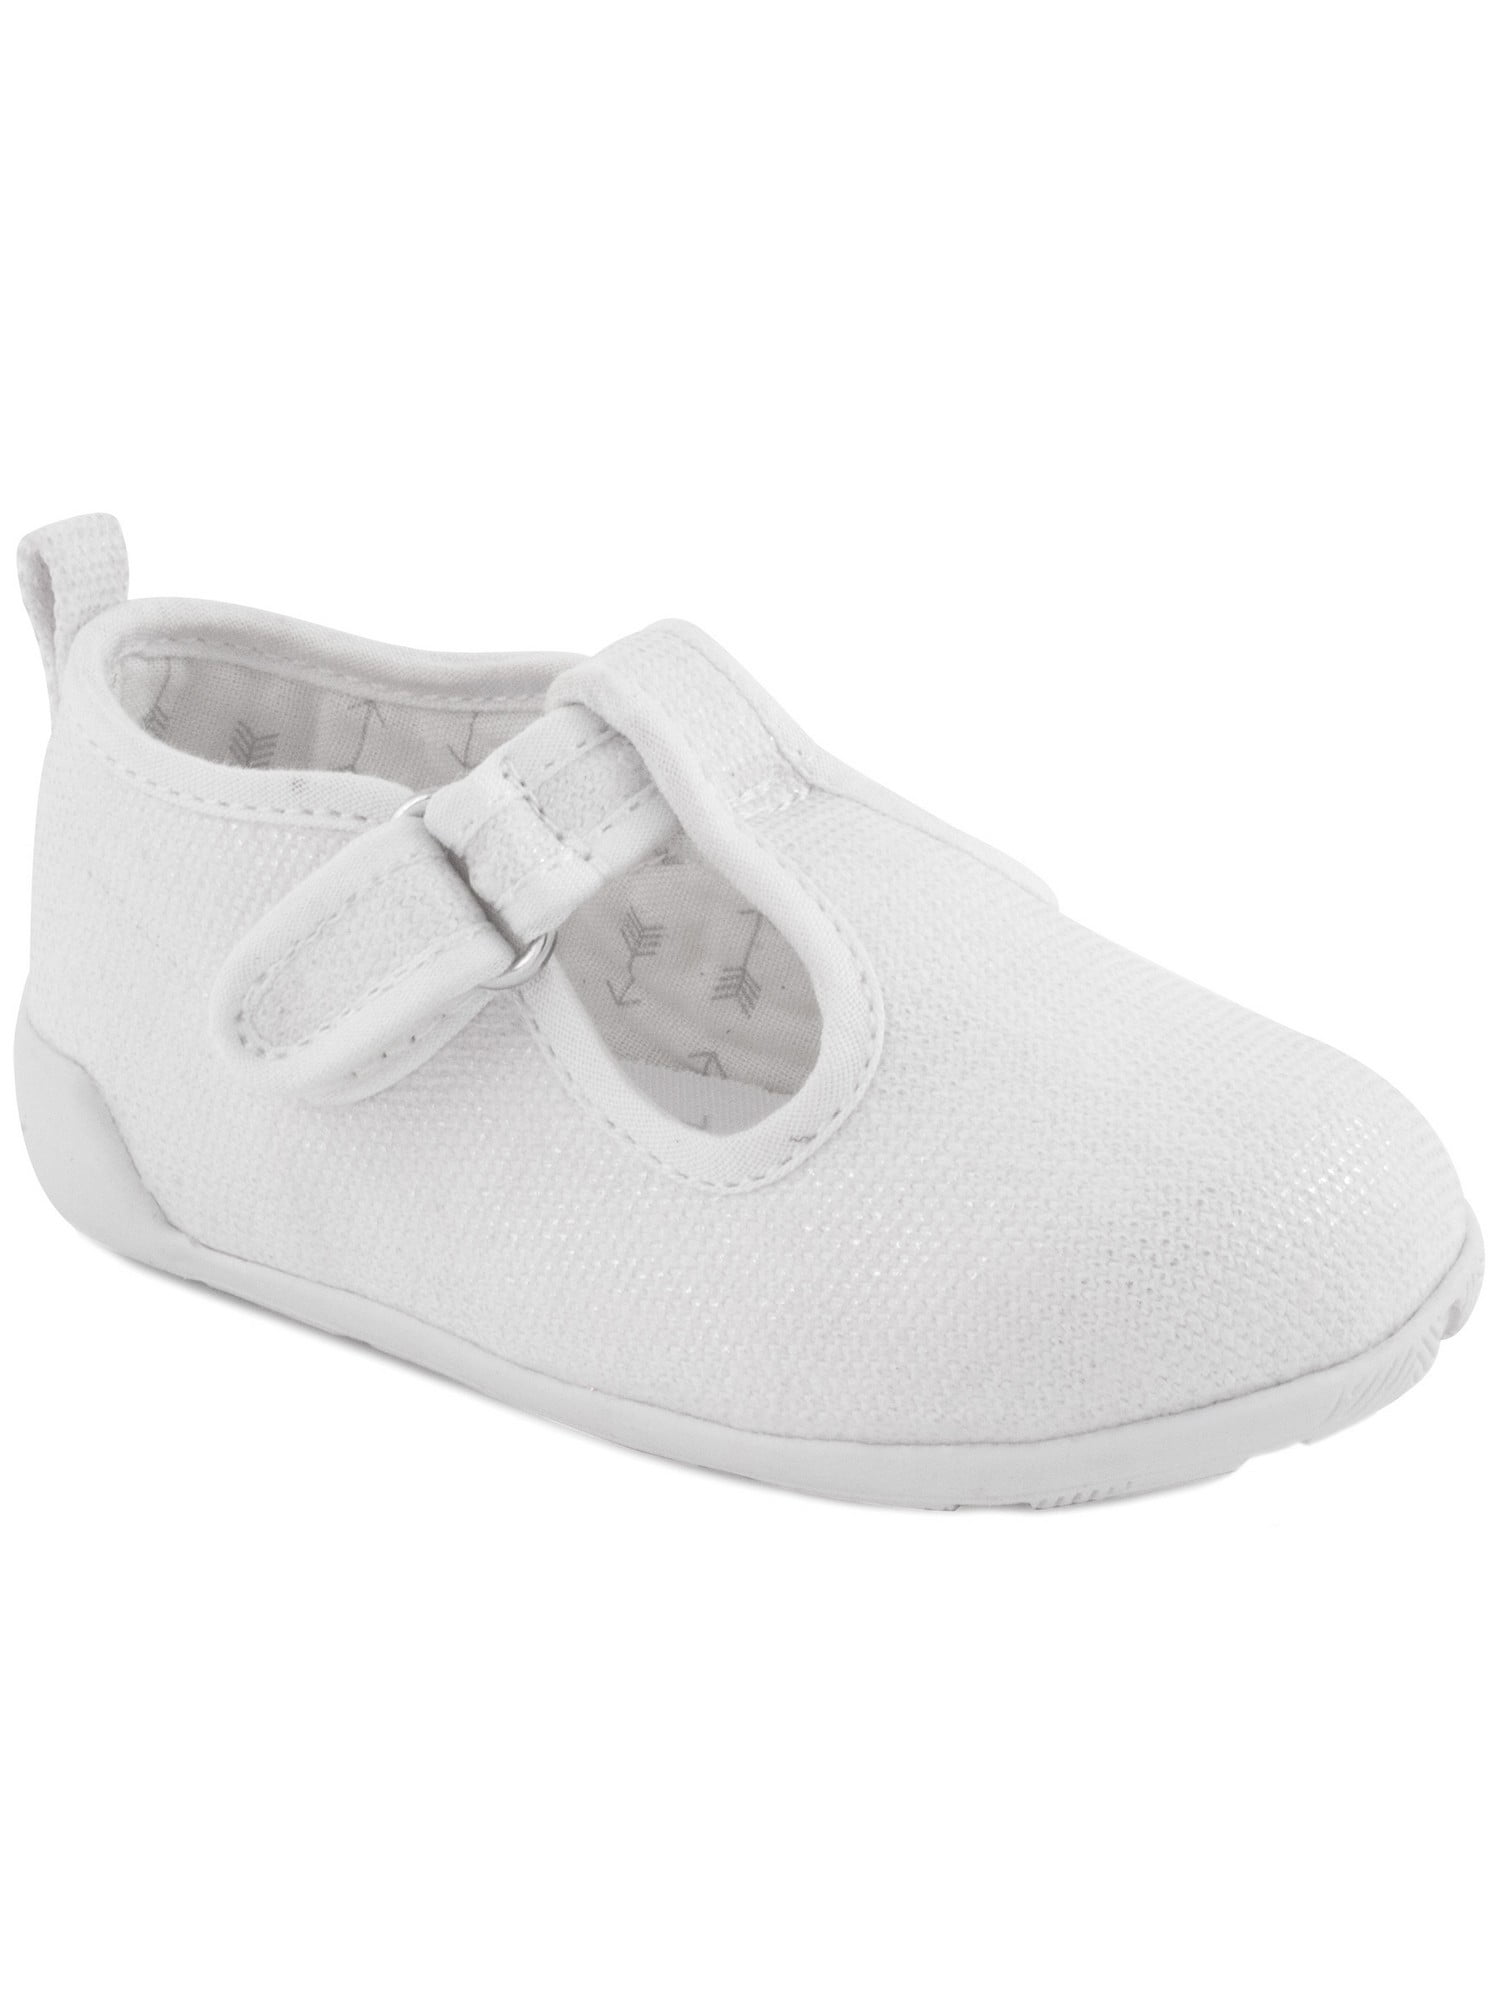 girls white canvas shoes